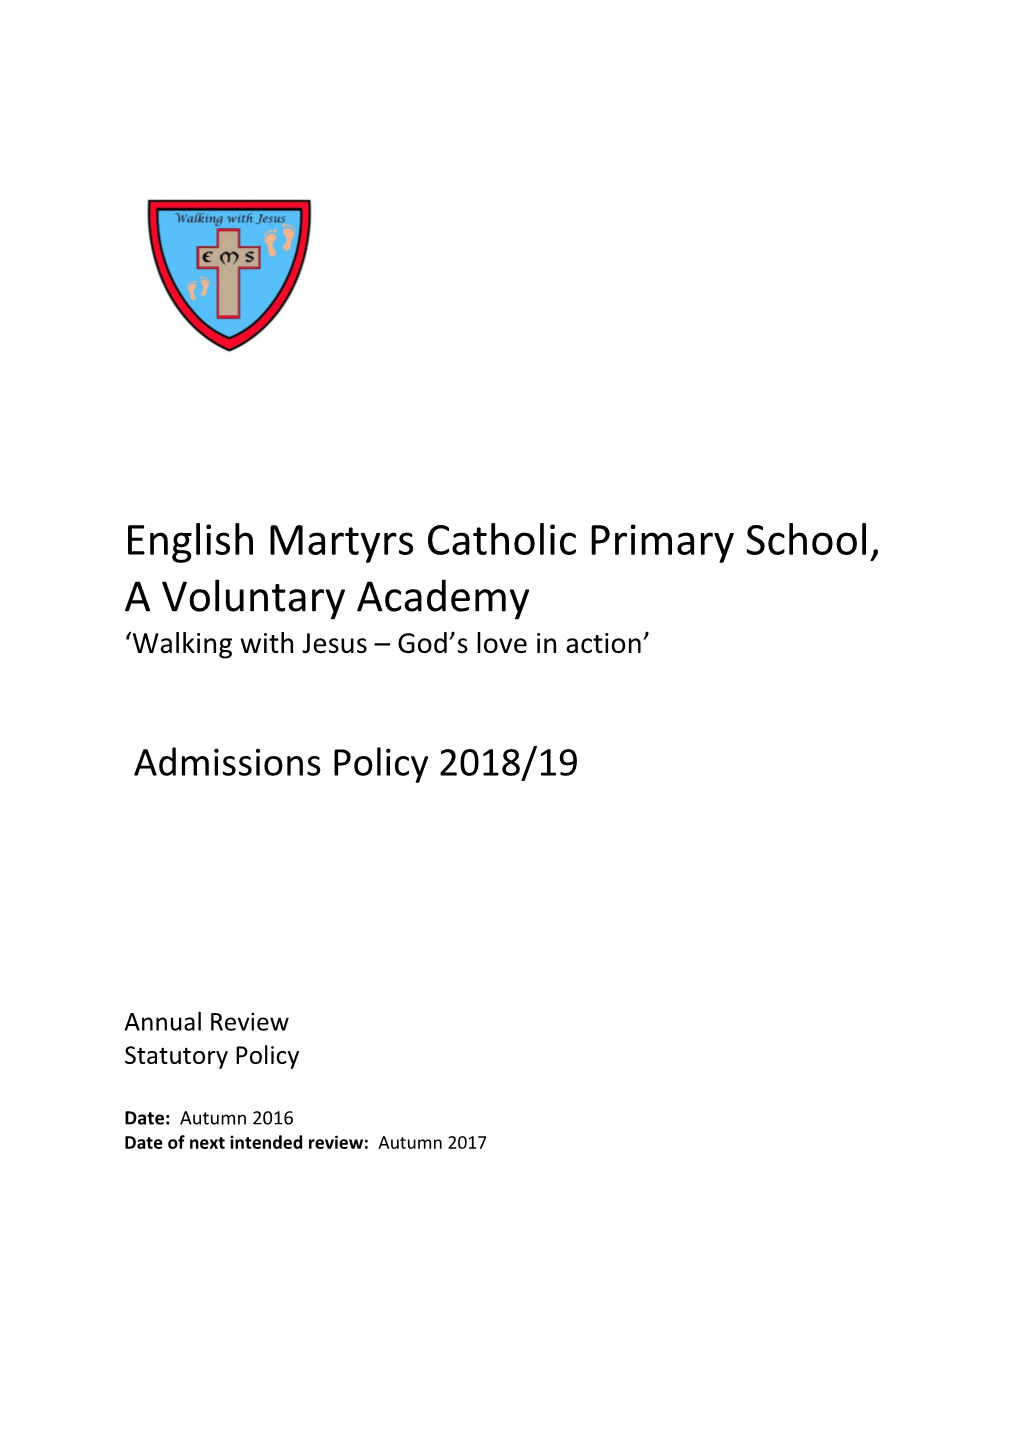 English Martyrs Admission Policy 2018-19